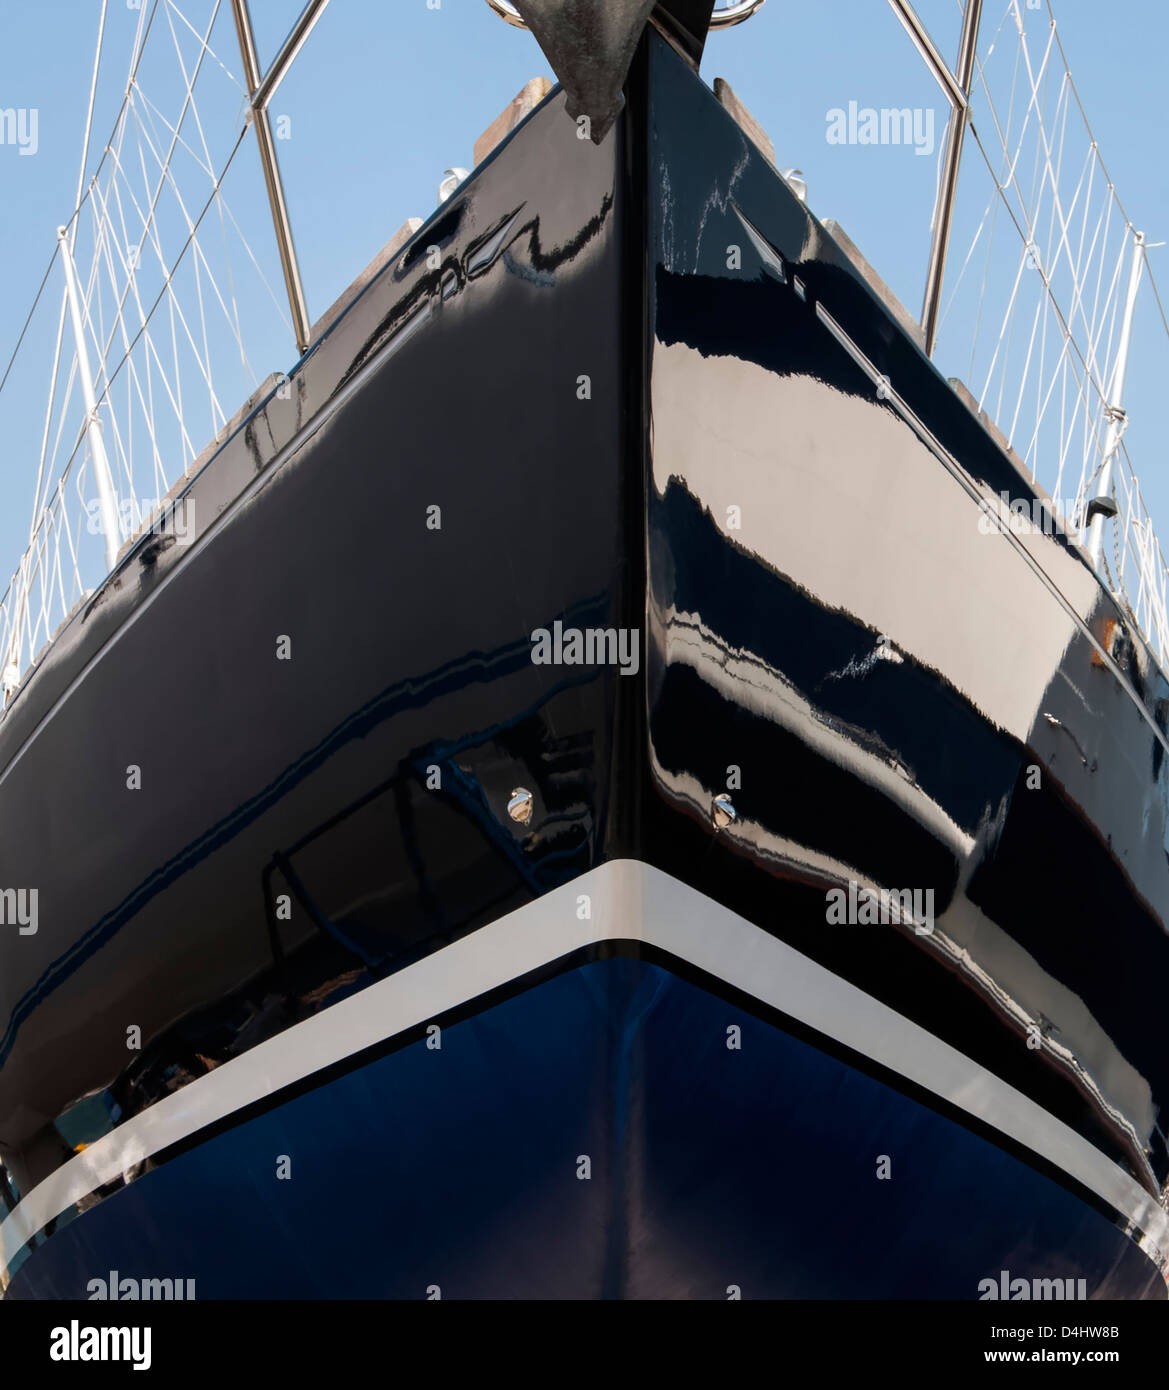 Symmetrical close-up of yacht bow in dark blue glass reinforced plastic with white waterline stripe and blue anti-fouling paint Stock Photo